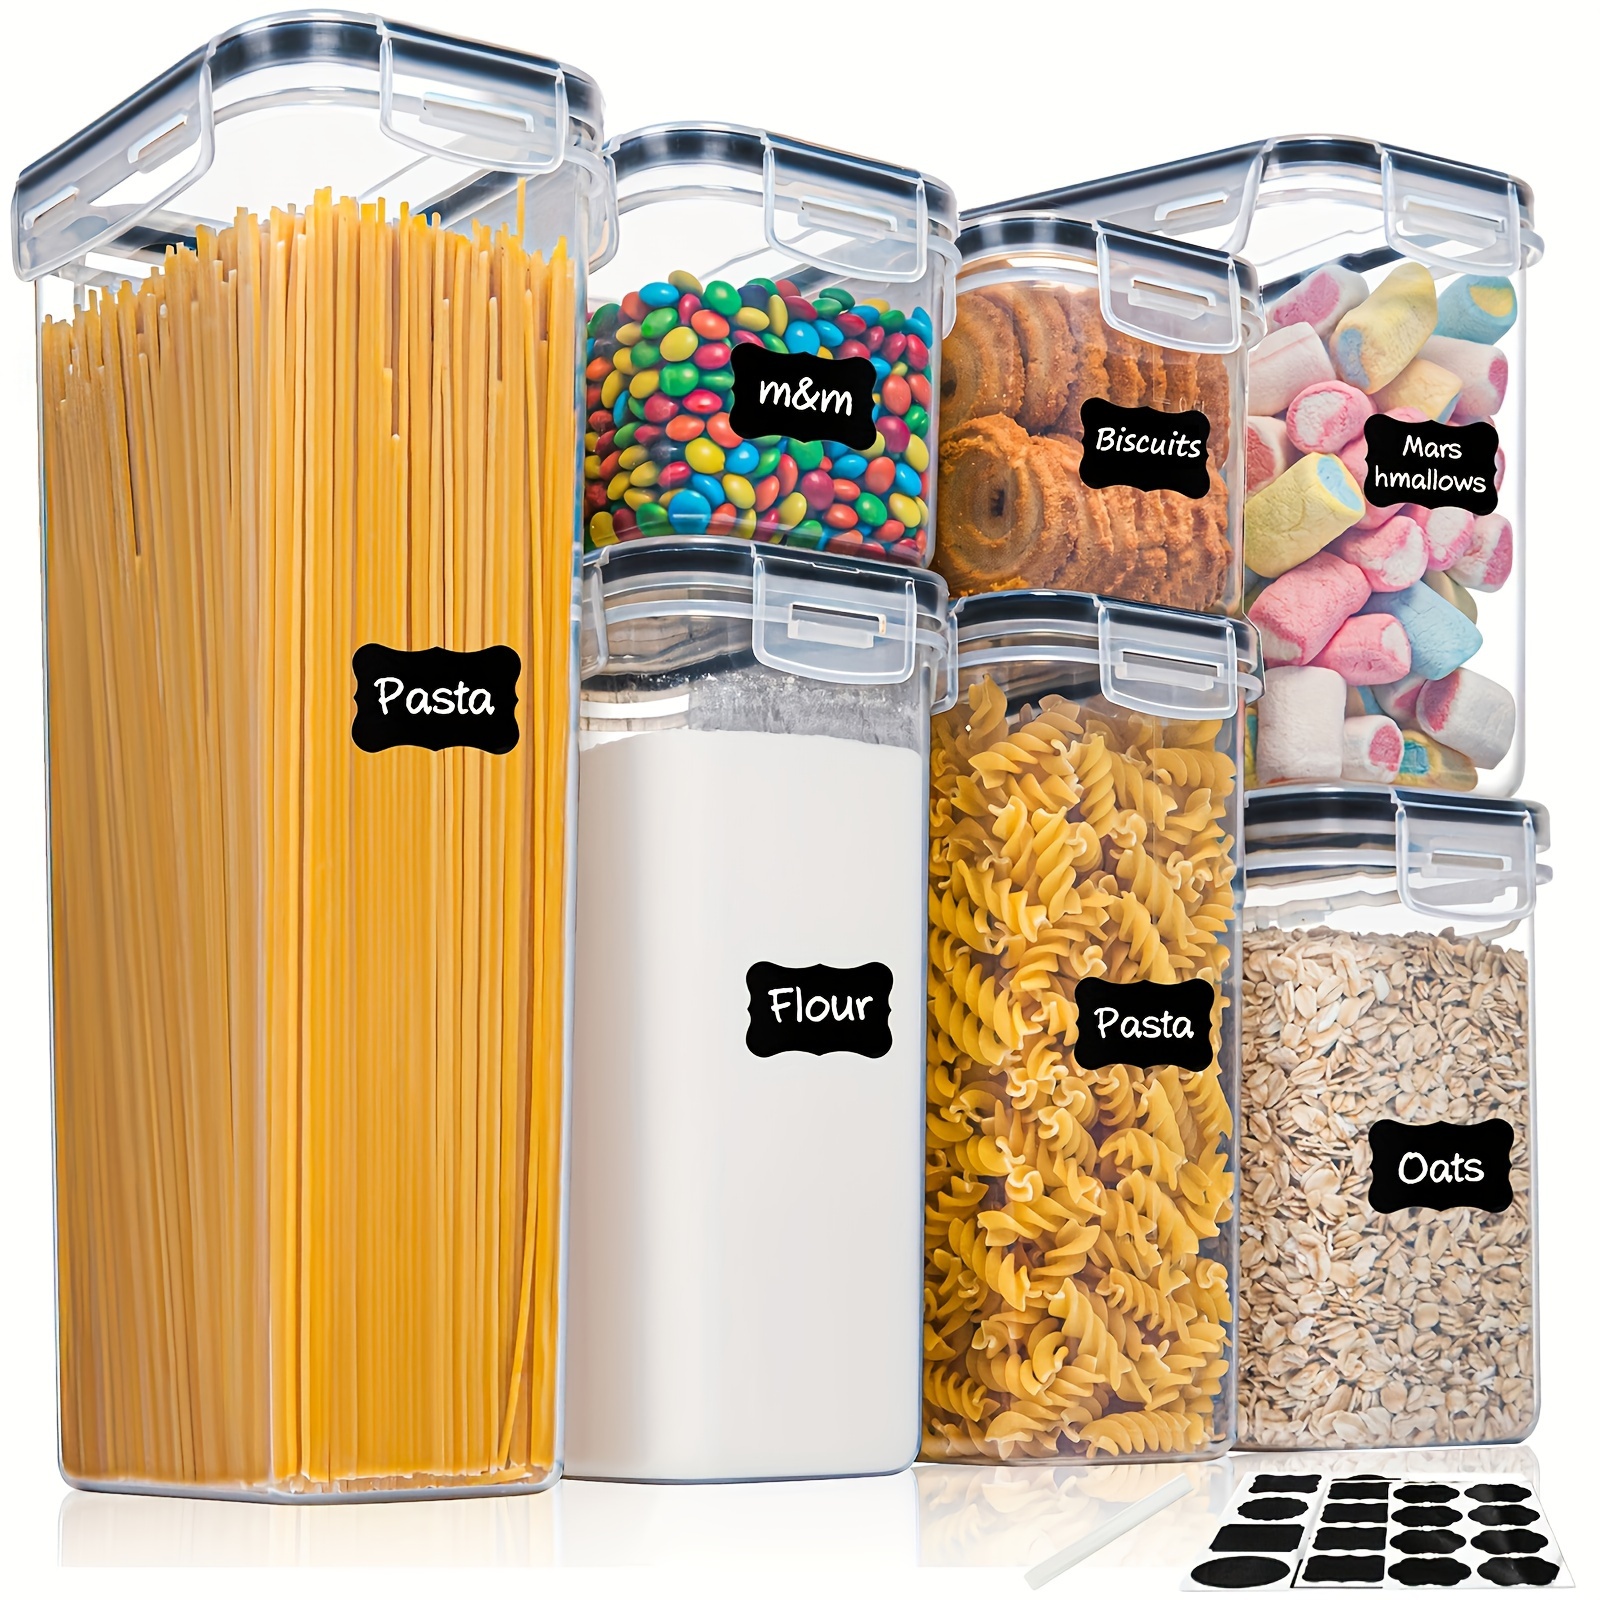 11 Safest Food Storage Containers For Non-Toxic Noms